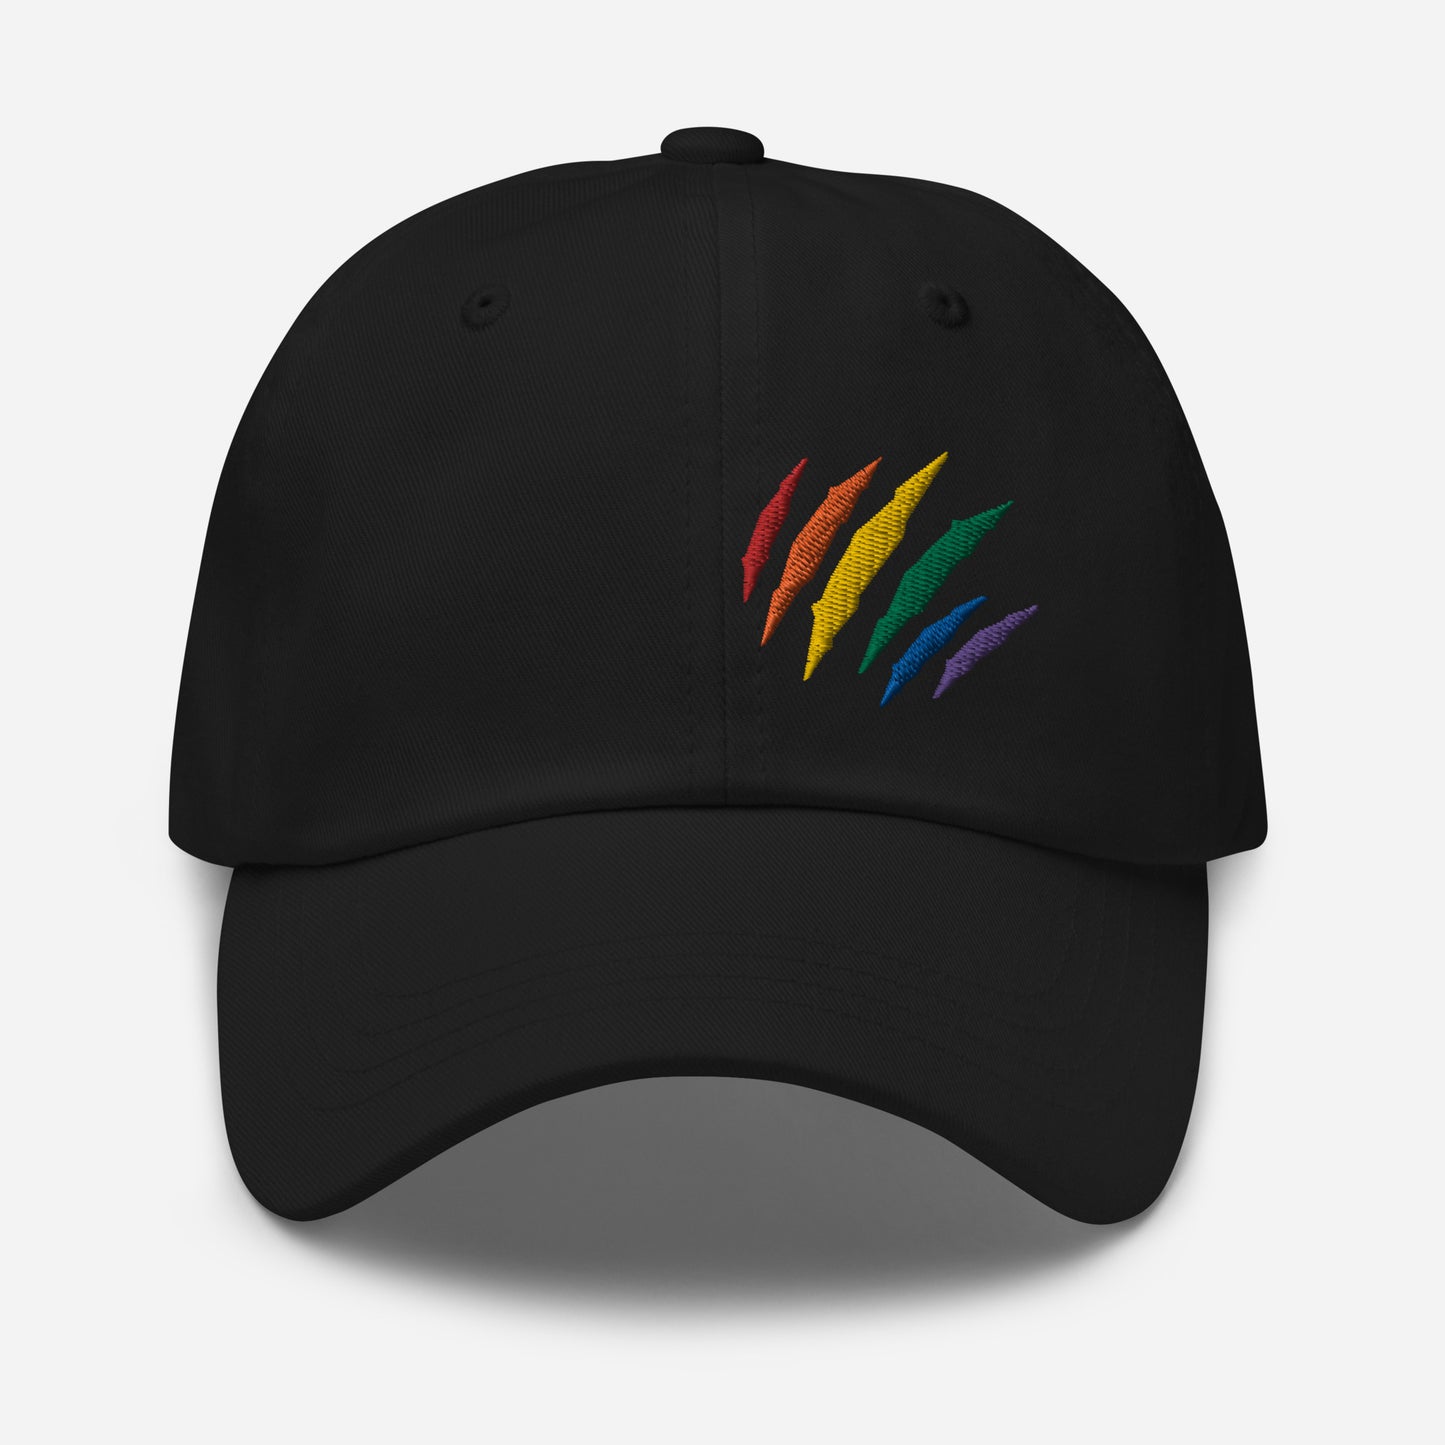 Black baseball hat featuring rainbow pride scratch mark embroidery with a low profile, adjustable strap.